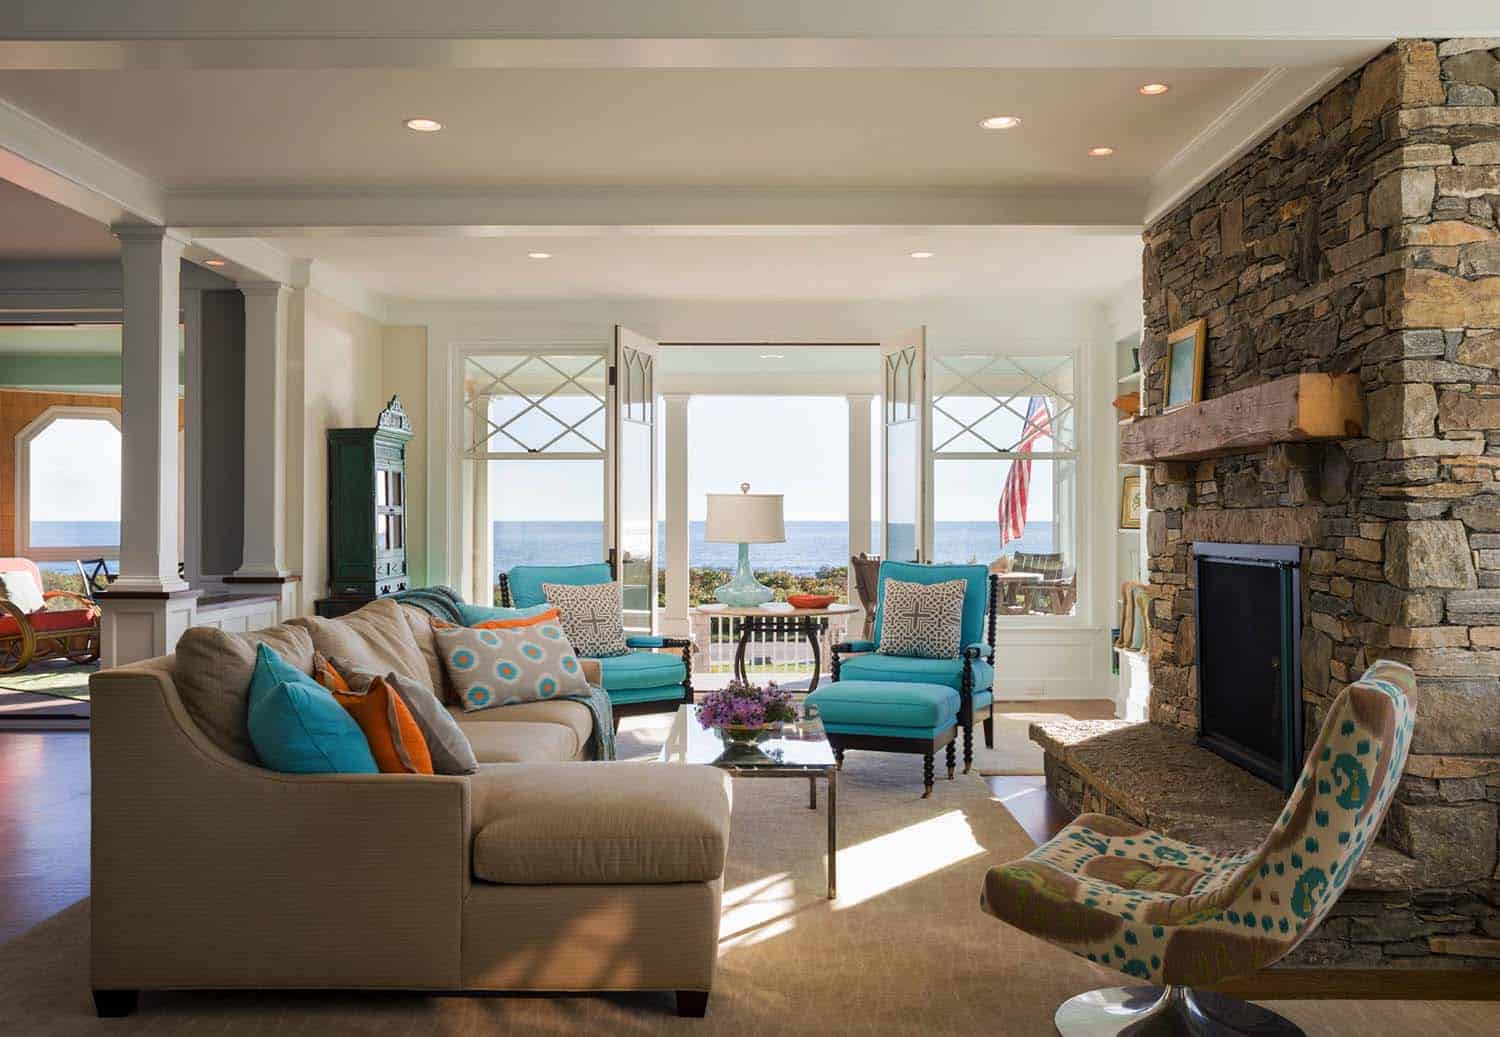  Oceanfront Home-LEED Silver-George Penniman Architects-04-1 Kindesign